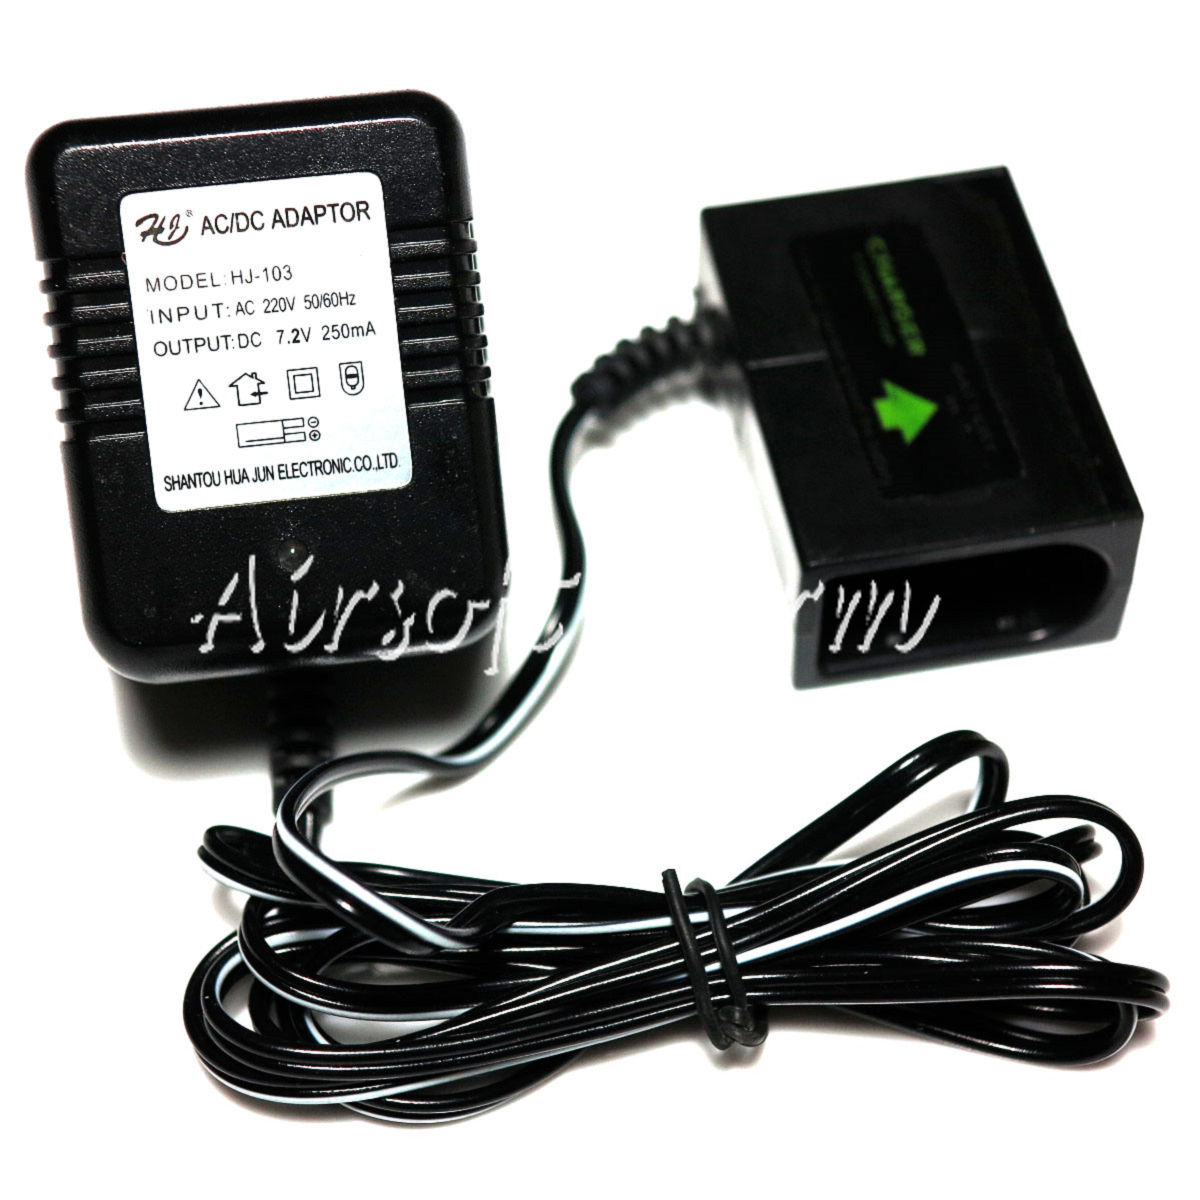 WELL 7.2V Micro Mini Battery Charger for R4 MP7/Marui G18